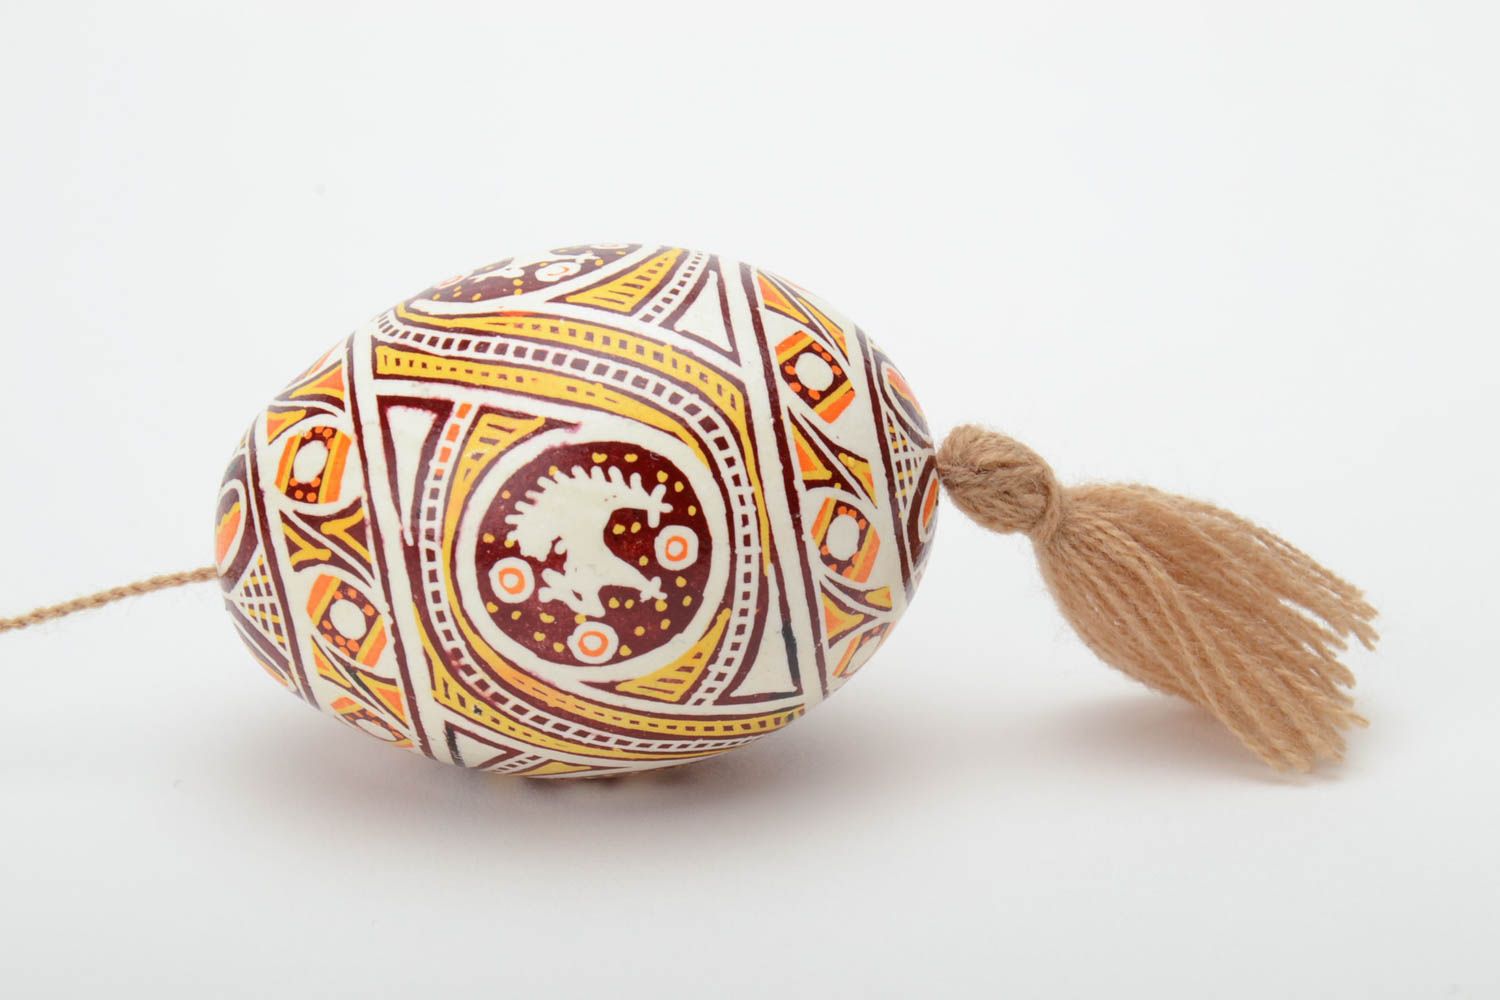 Homemade painted Easter egg with tassel and patterns created using waxing technique photo 3